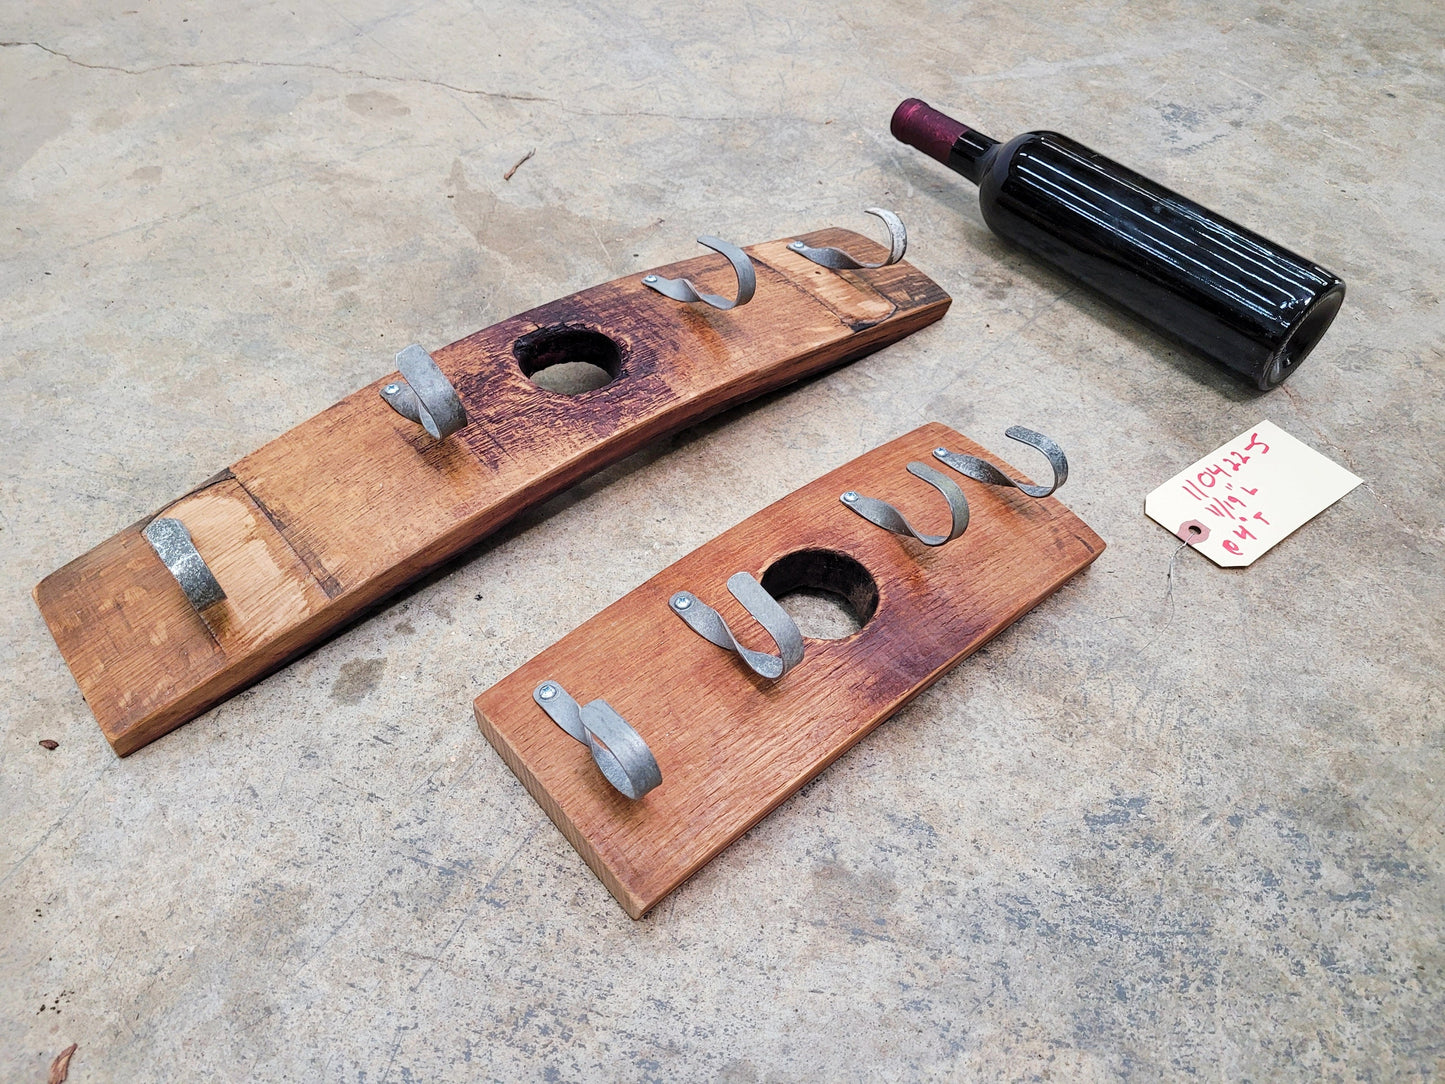 SALE 2 Wine Barrel Coat Racks Made from Retired Cakebread California wine barrels - 100% Recycled + Ready to Ship! 110422-5